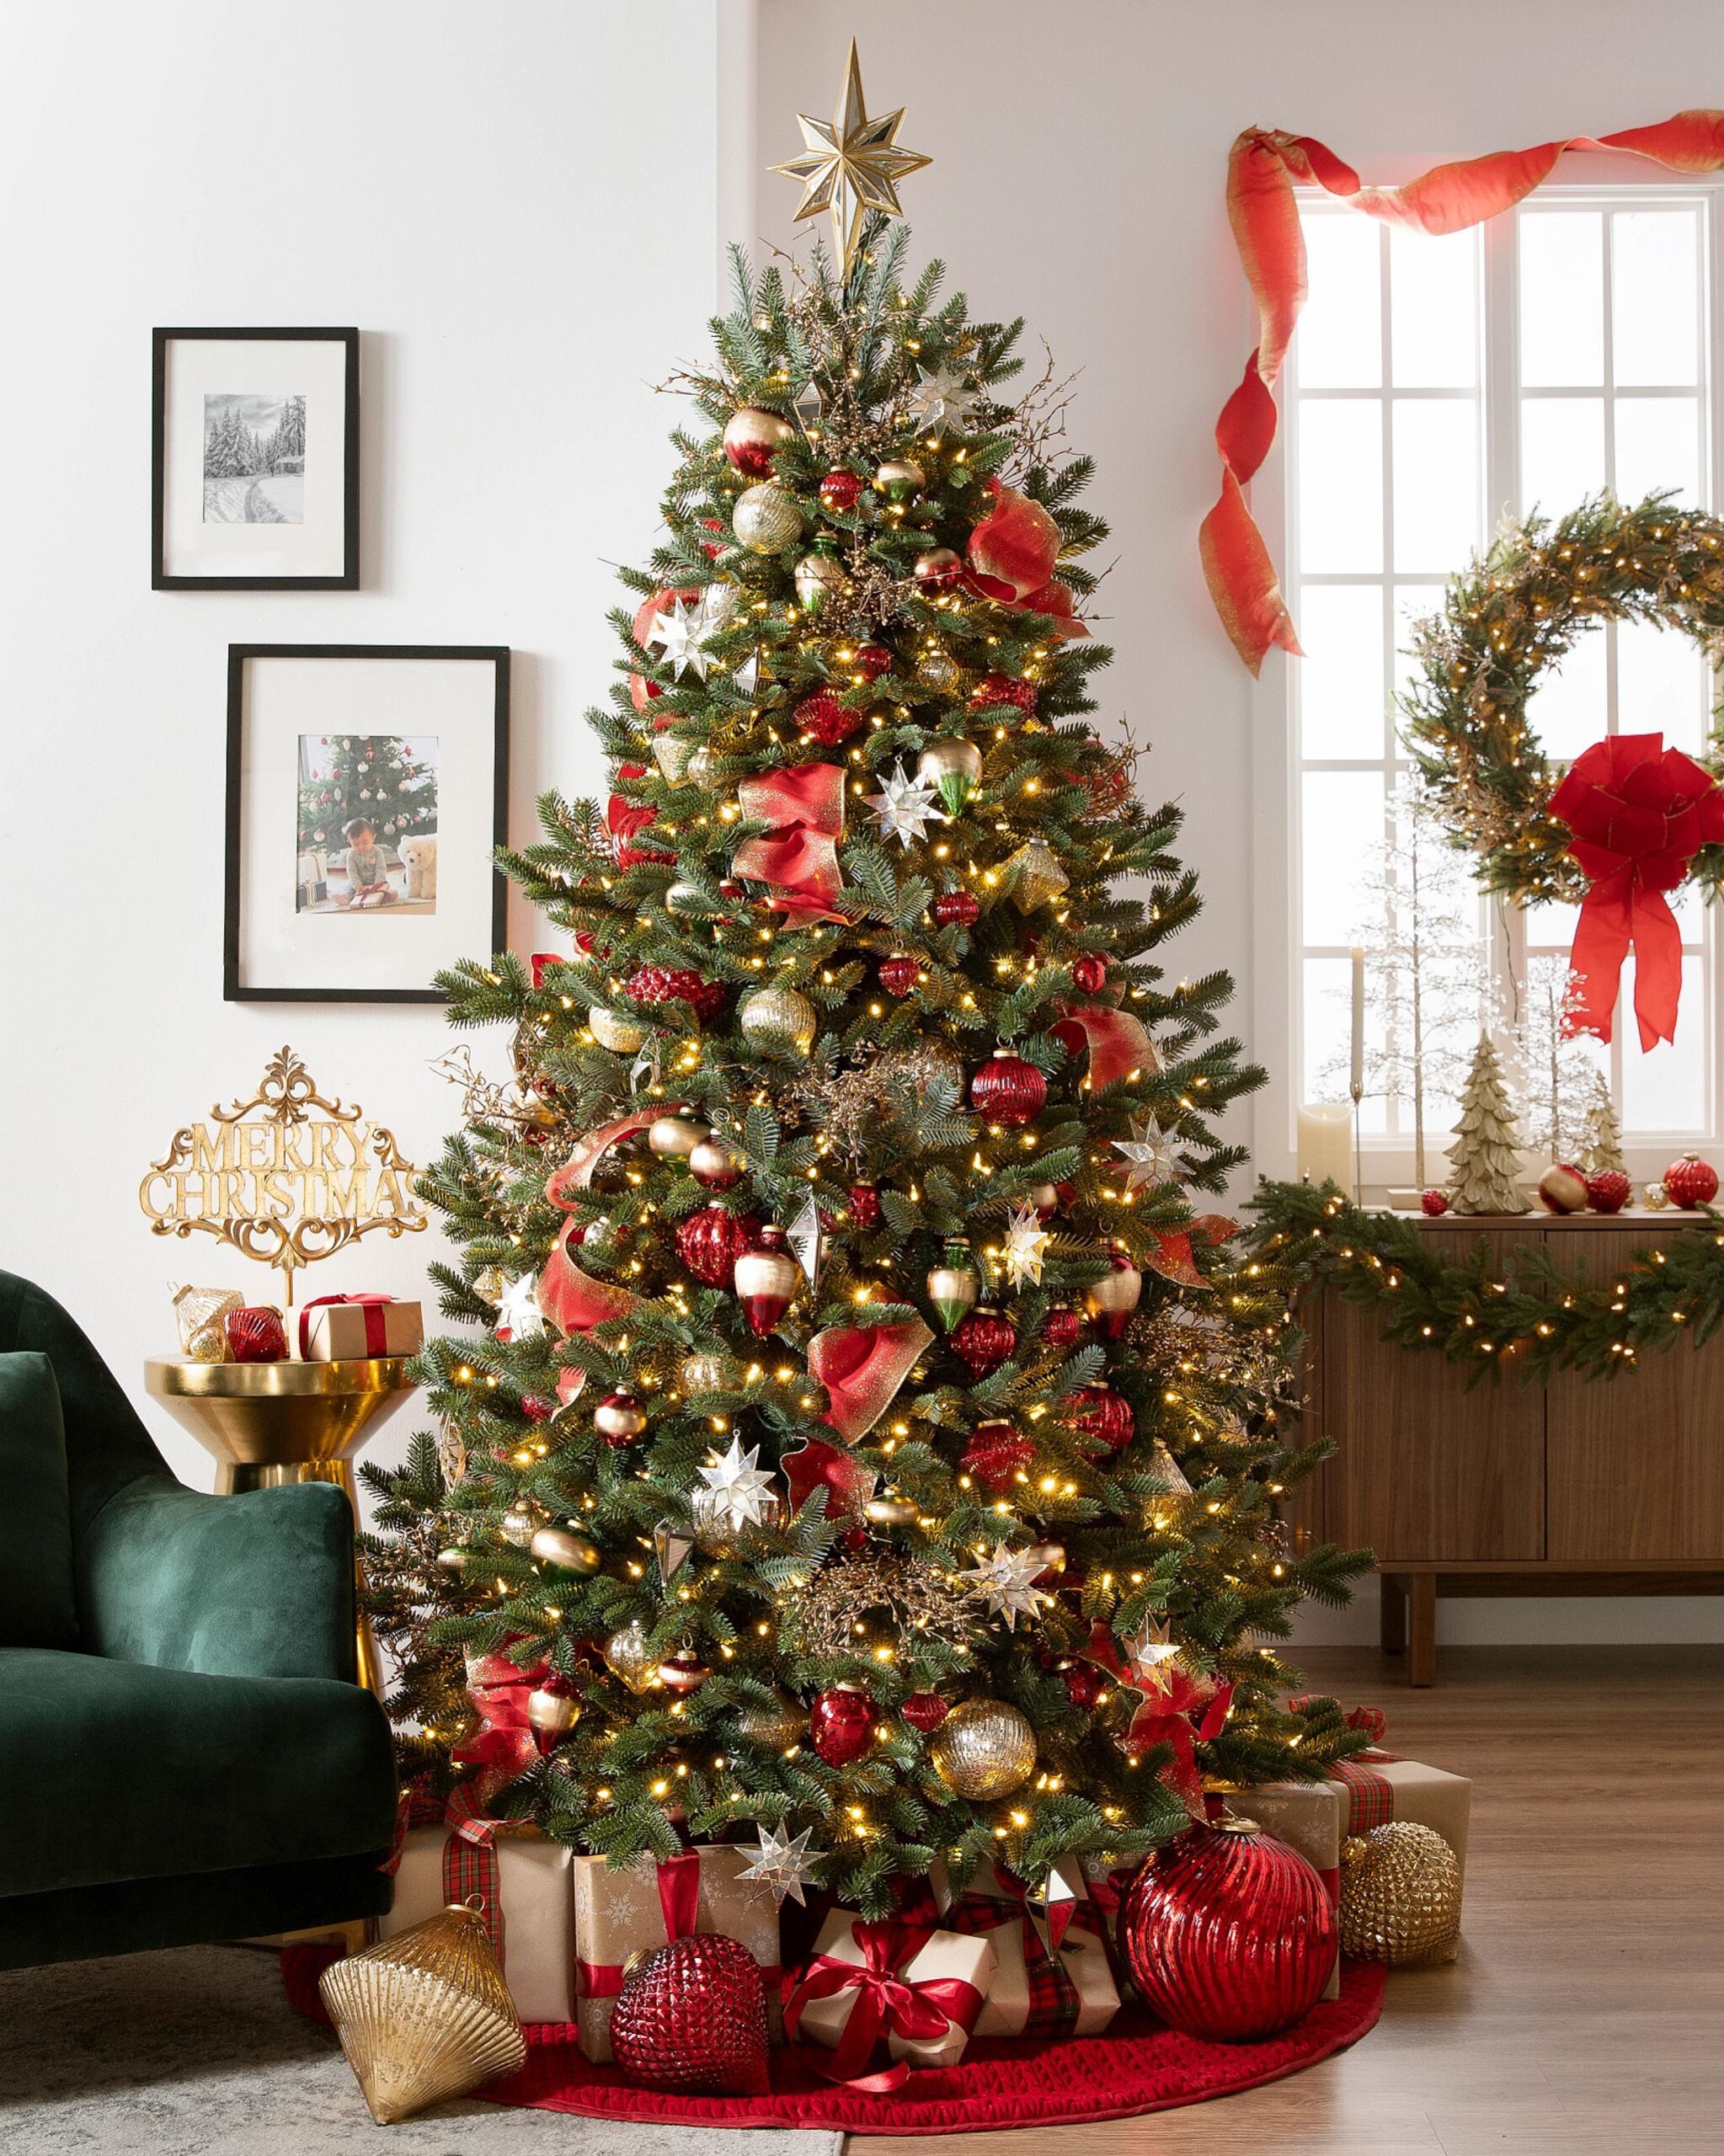 7 Simple Steps to Prepare Your Home for Christmas - Balsam Hill Blog